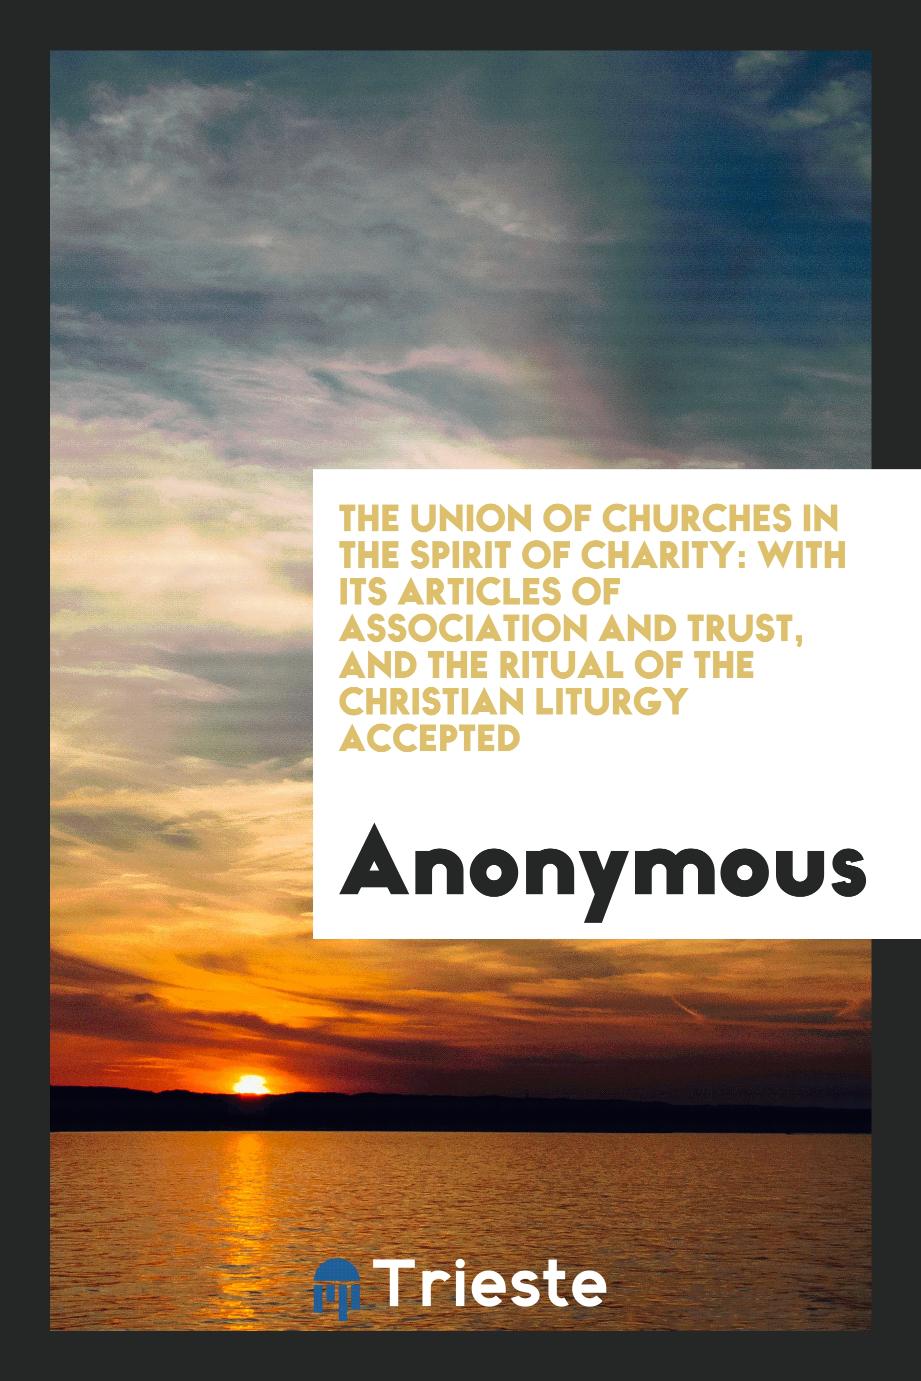 The Union of churches in the spirit of charity: with its articles of association and trust, and the ritual of the Christian liturgy accepted